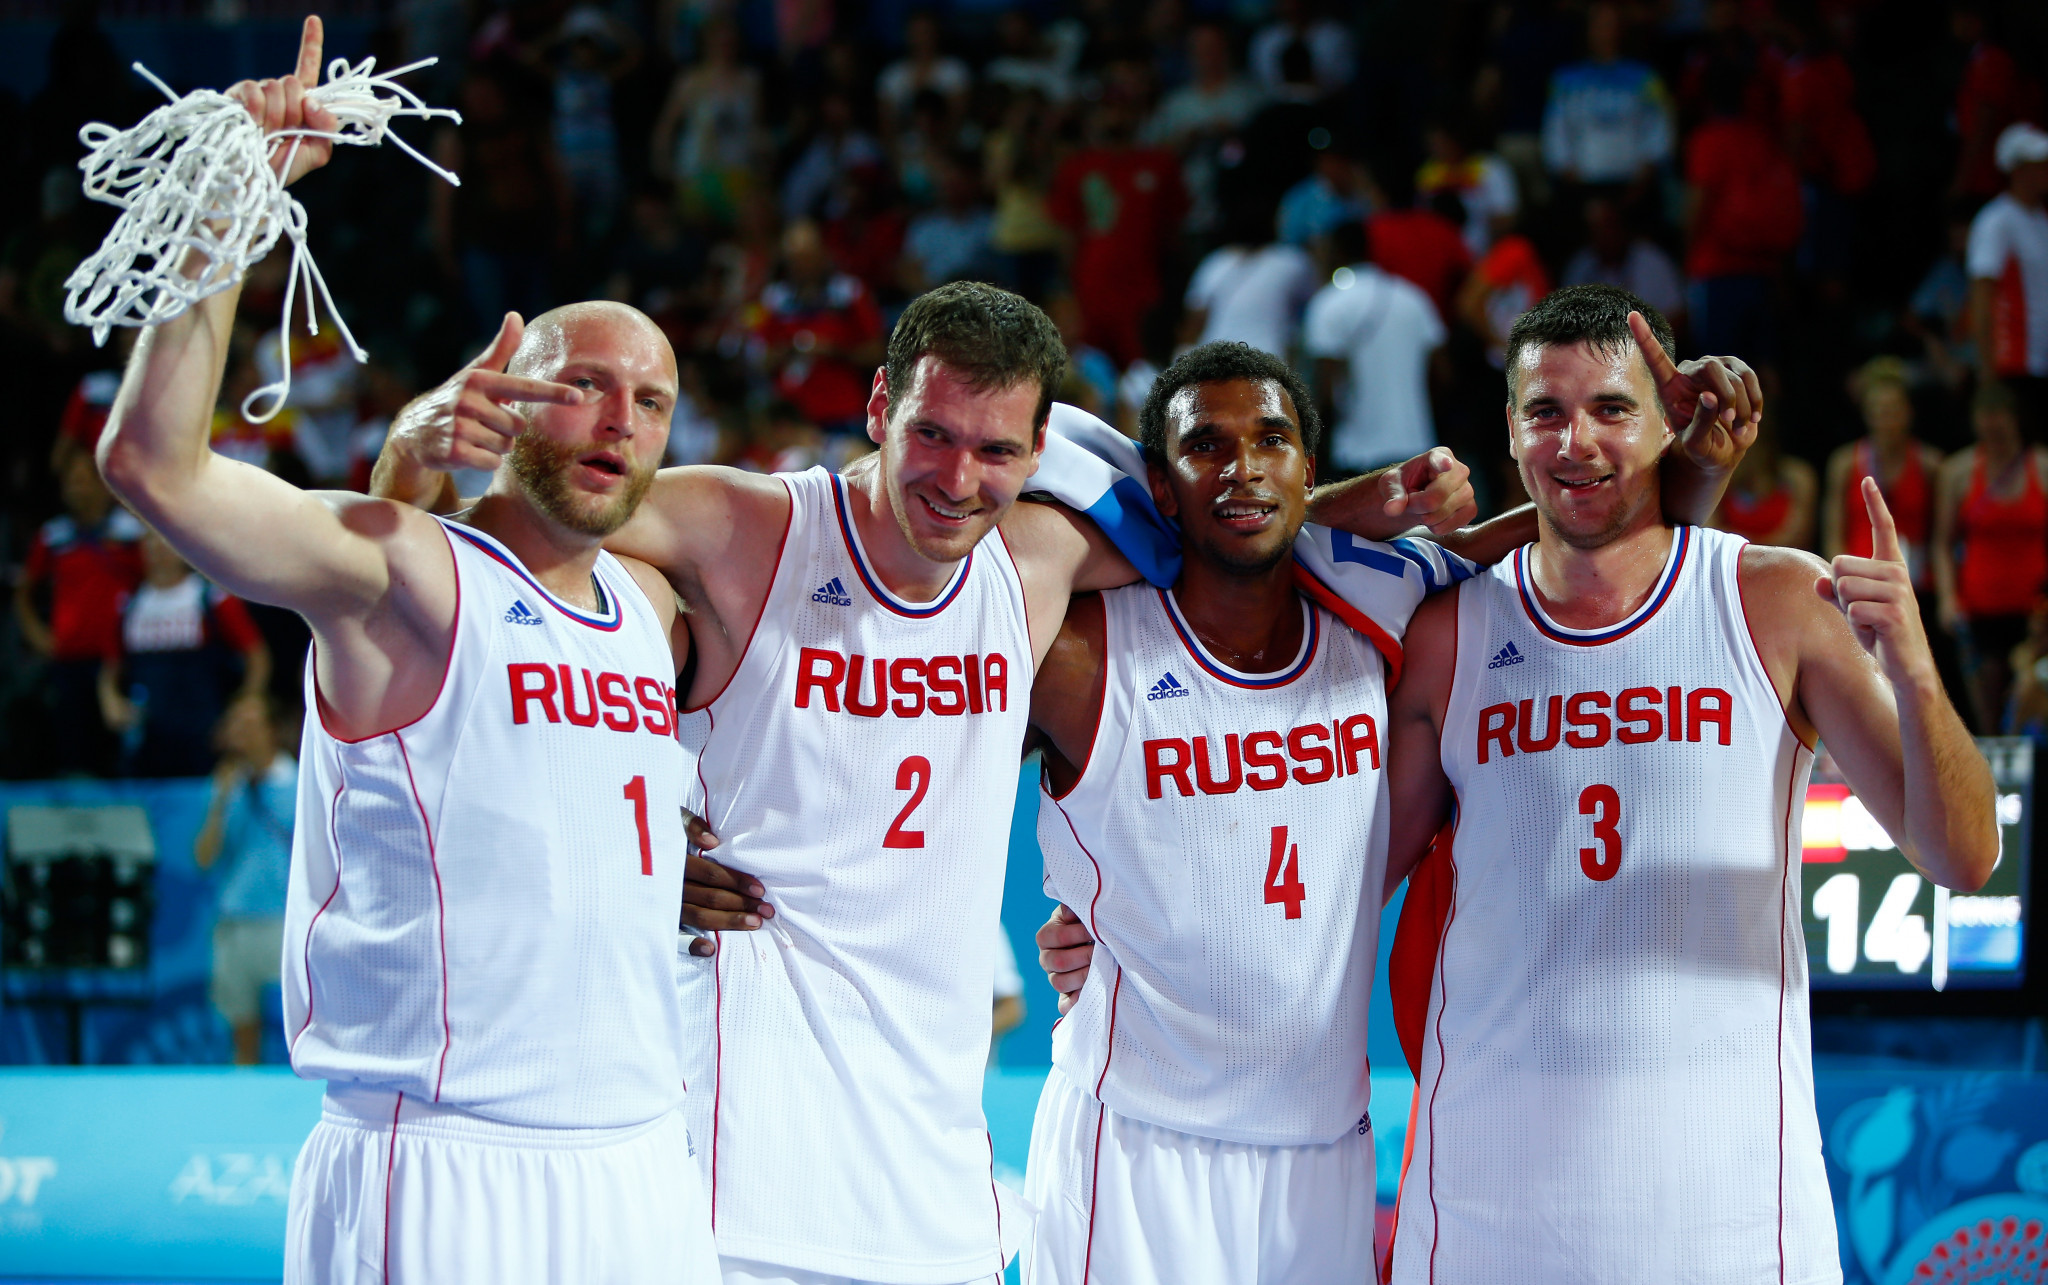 Russia's men and women's 3x3 basketball teams won their opening matches at the Minsk 2019 European Games ©Getty Images